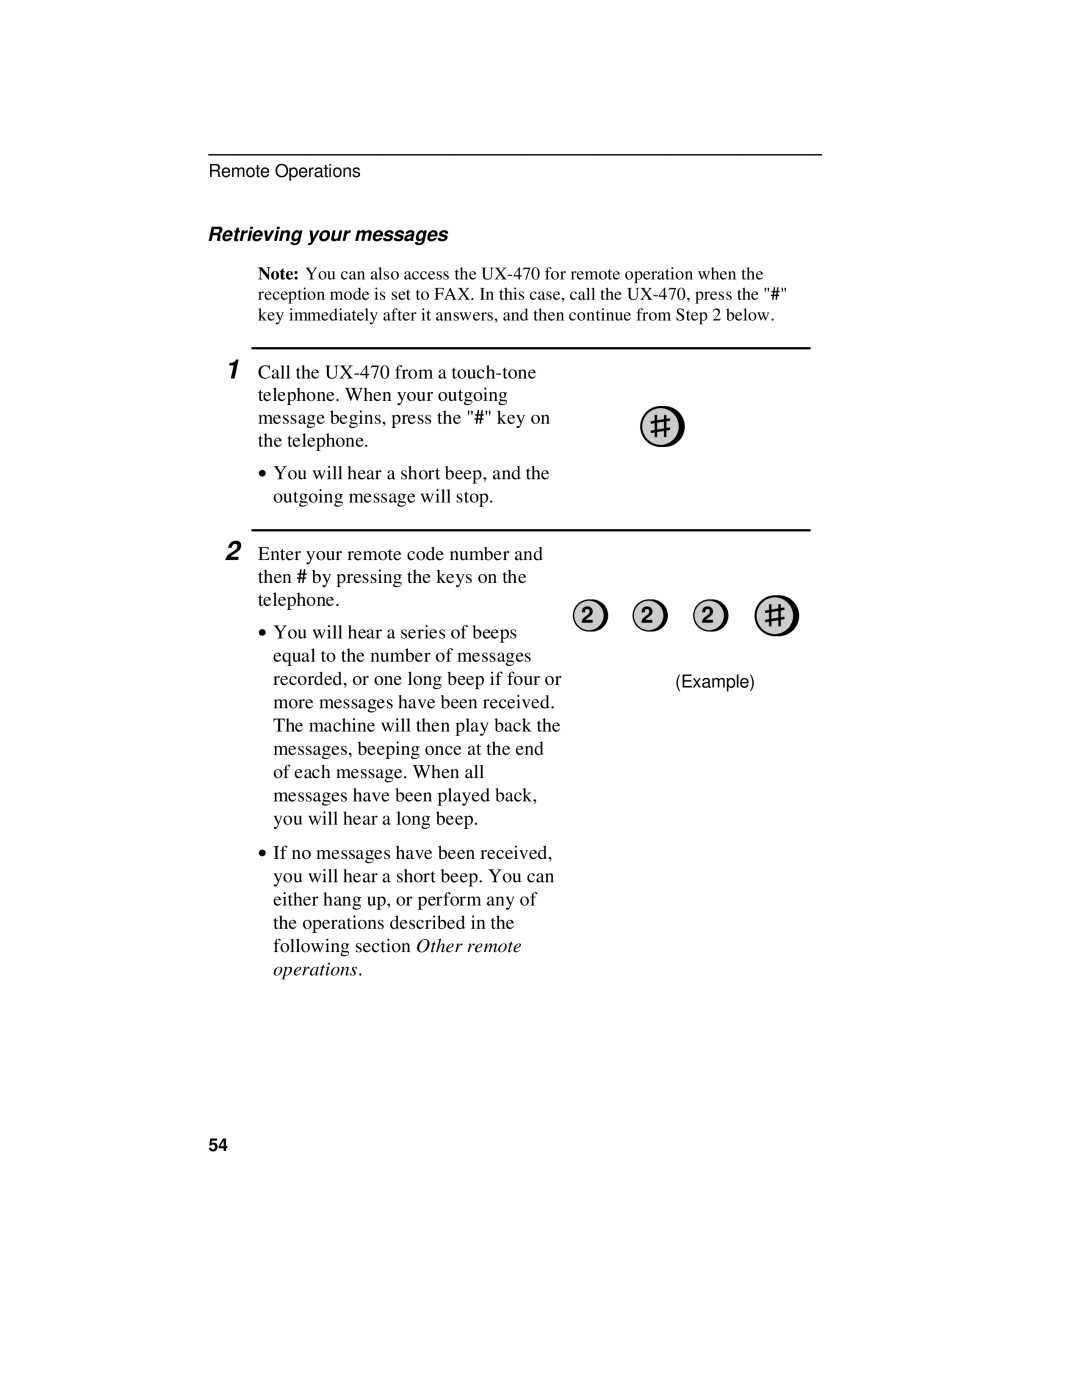 Sharp UX-470 operation manual Retrieving your messages 